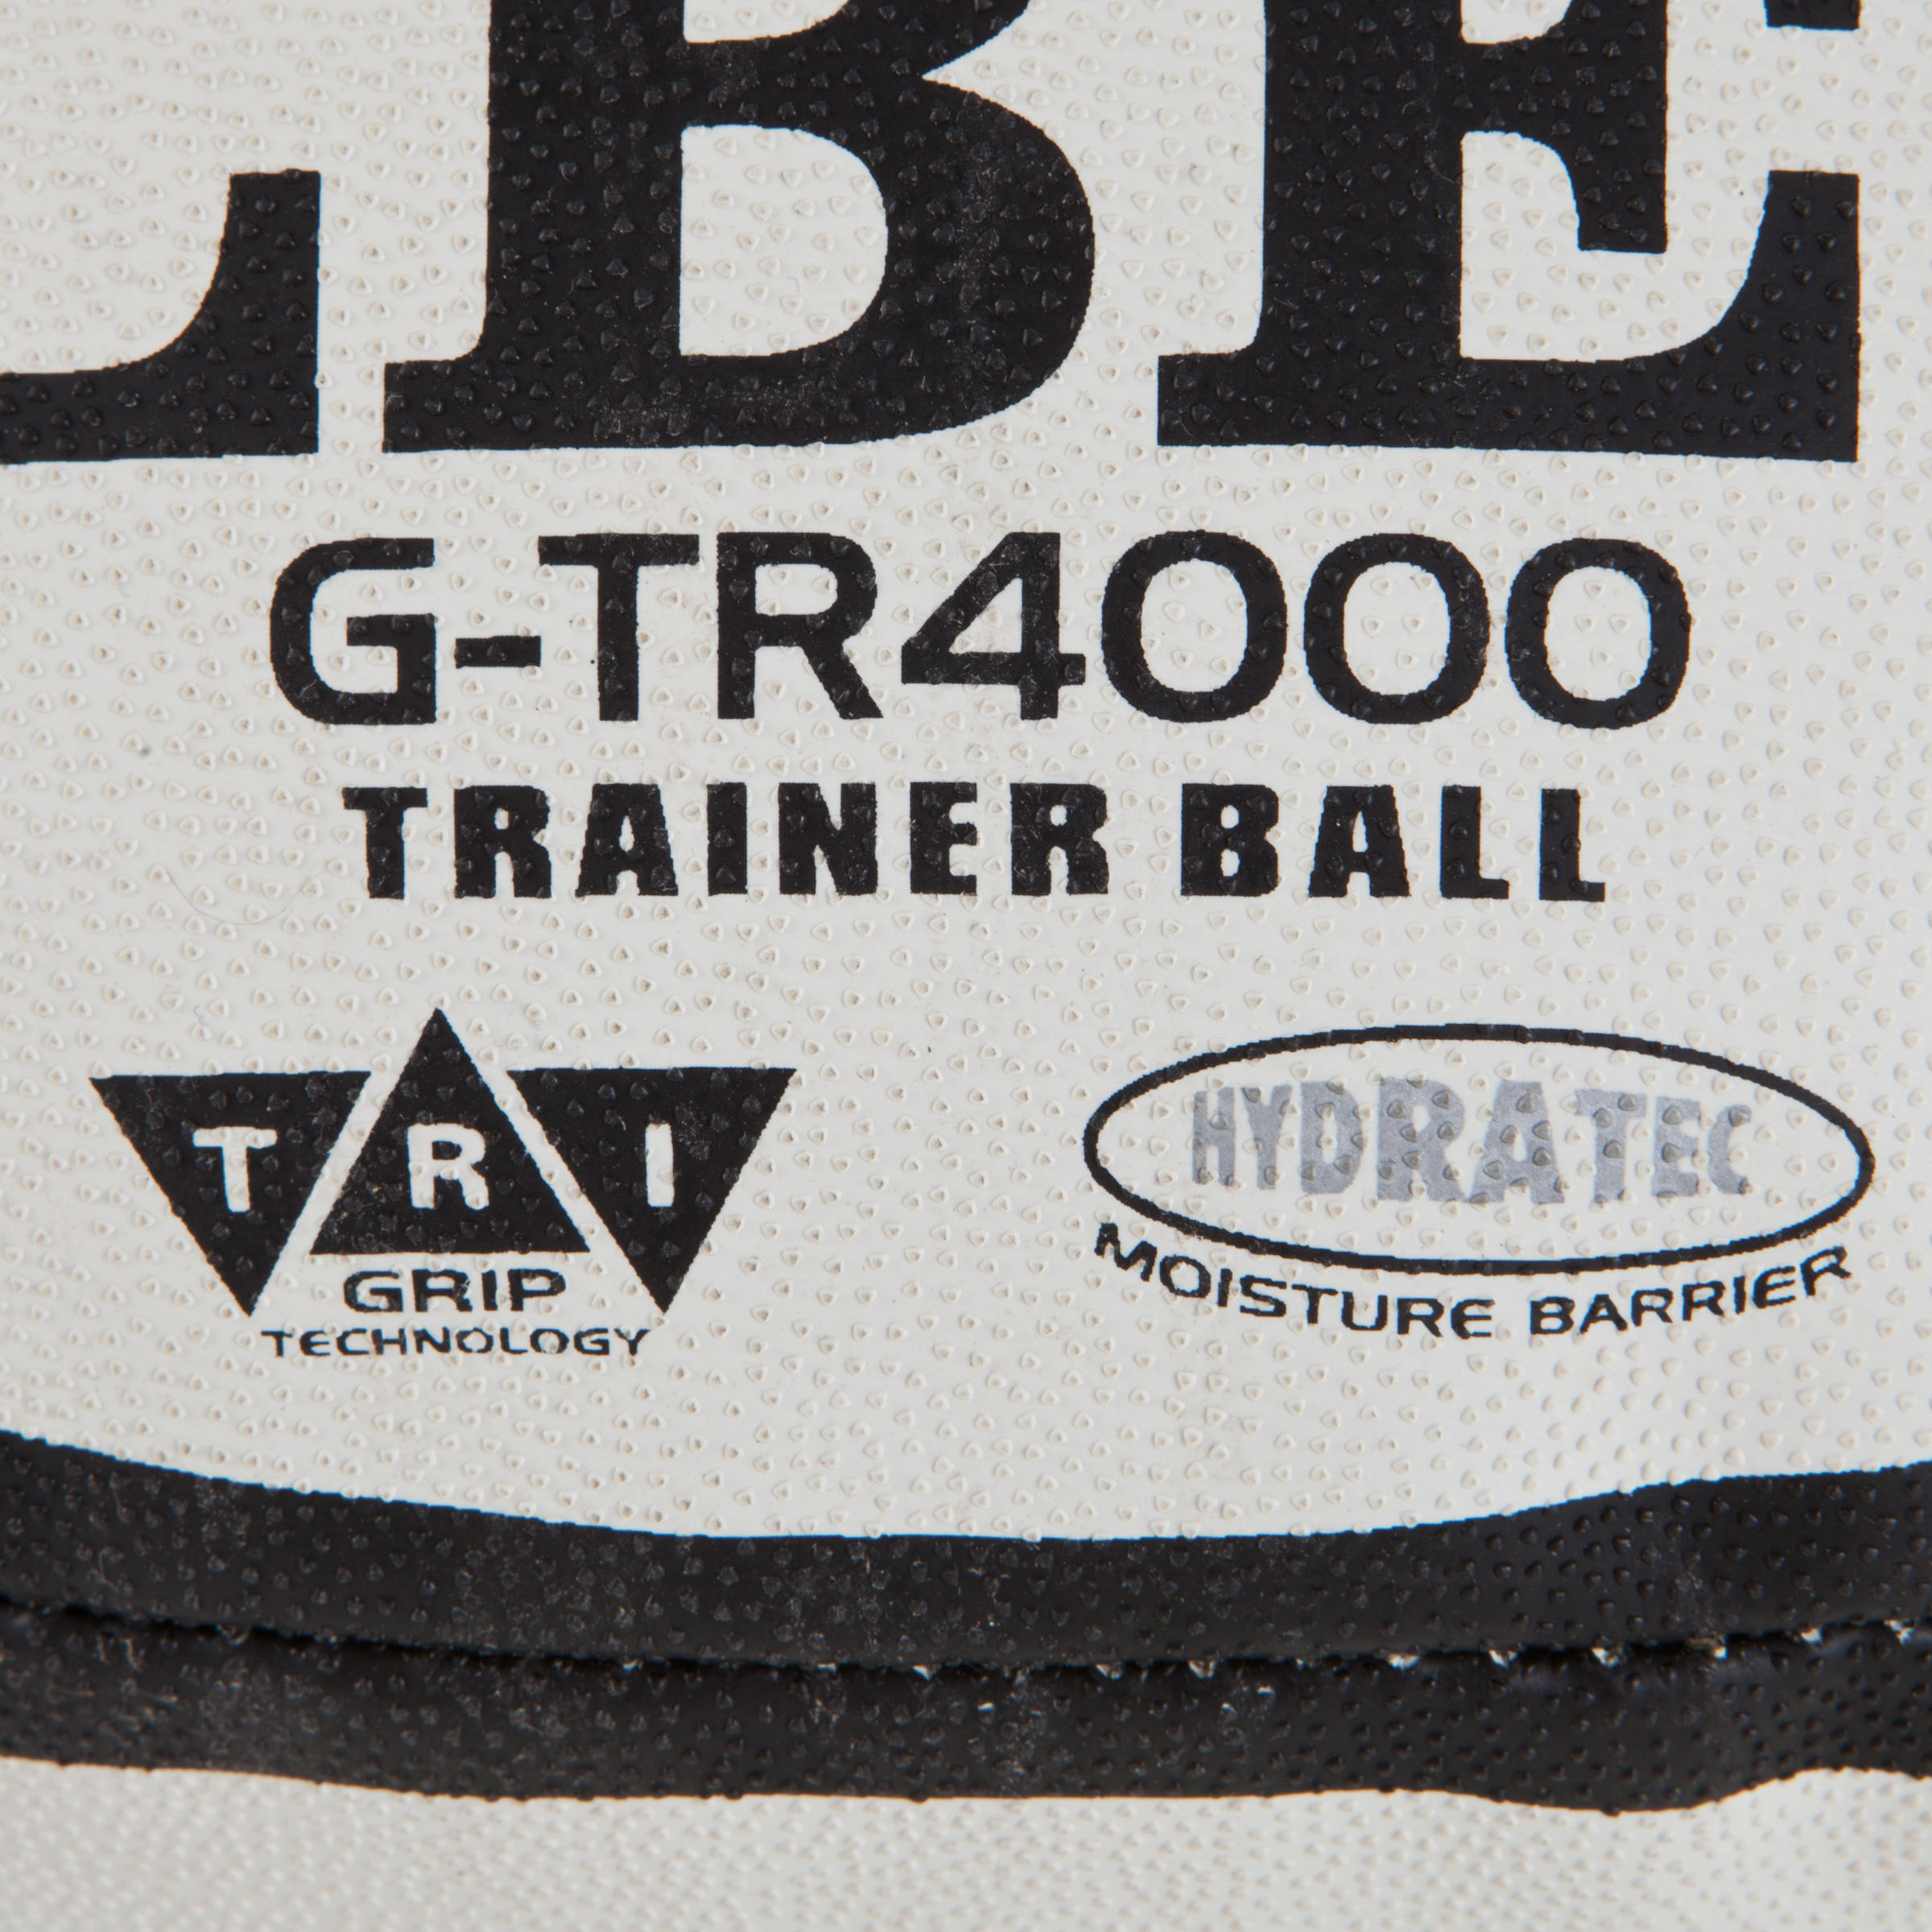 Rugby Ball Gtr4000 Size 5 - White/Black 4/9